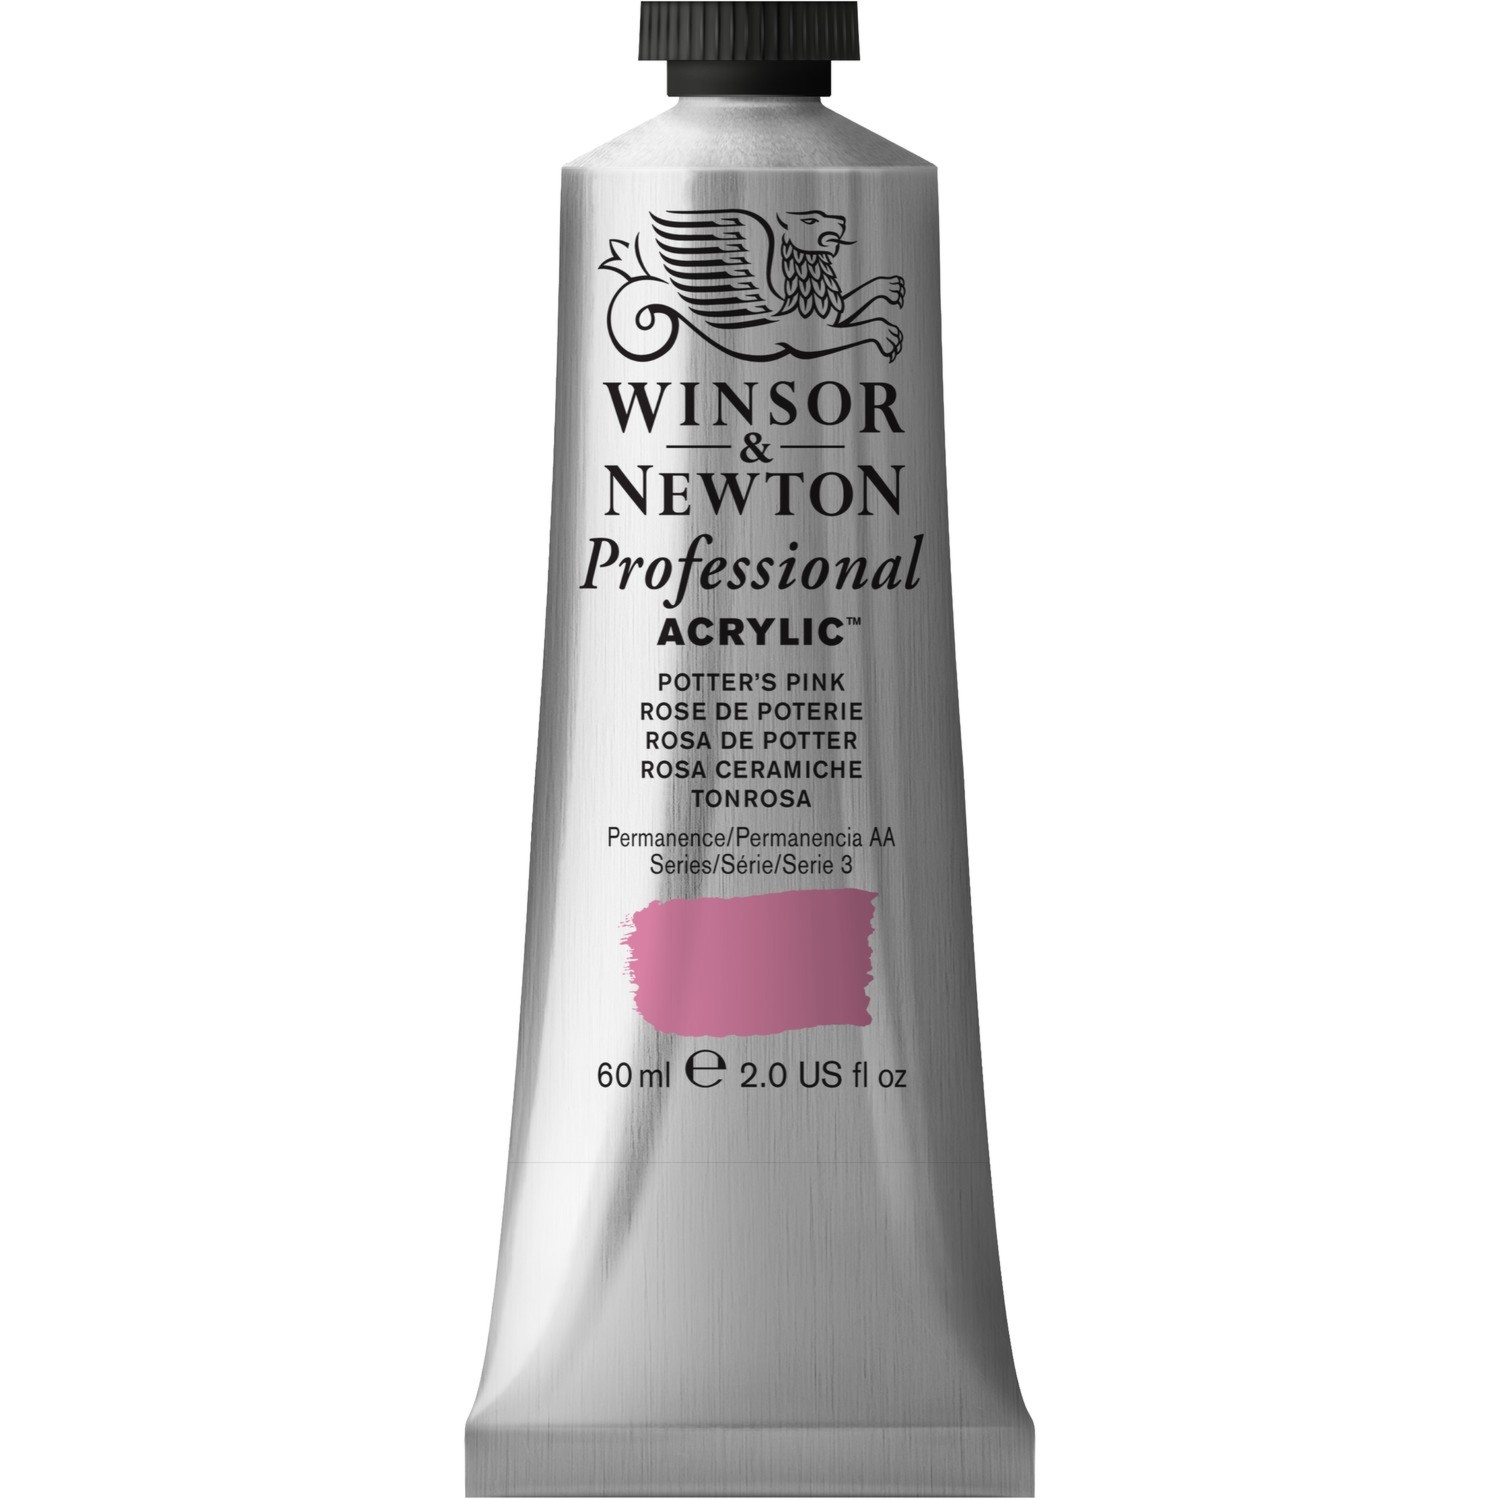 Winsor and Newton 60ml Professional Acrylic Paint - Potters Pink Image 1